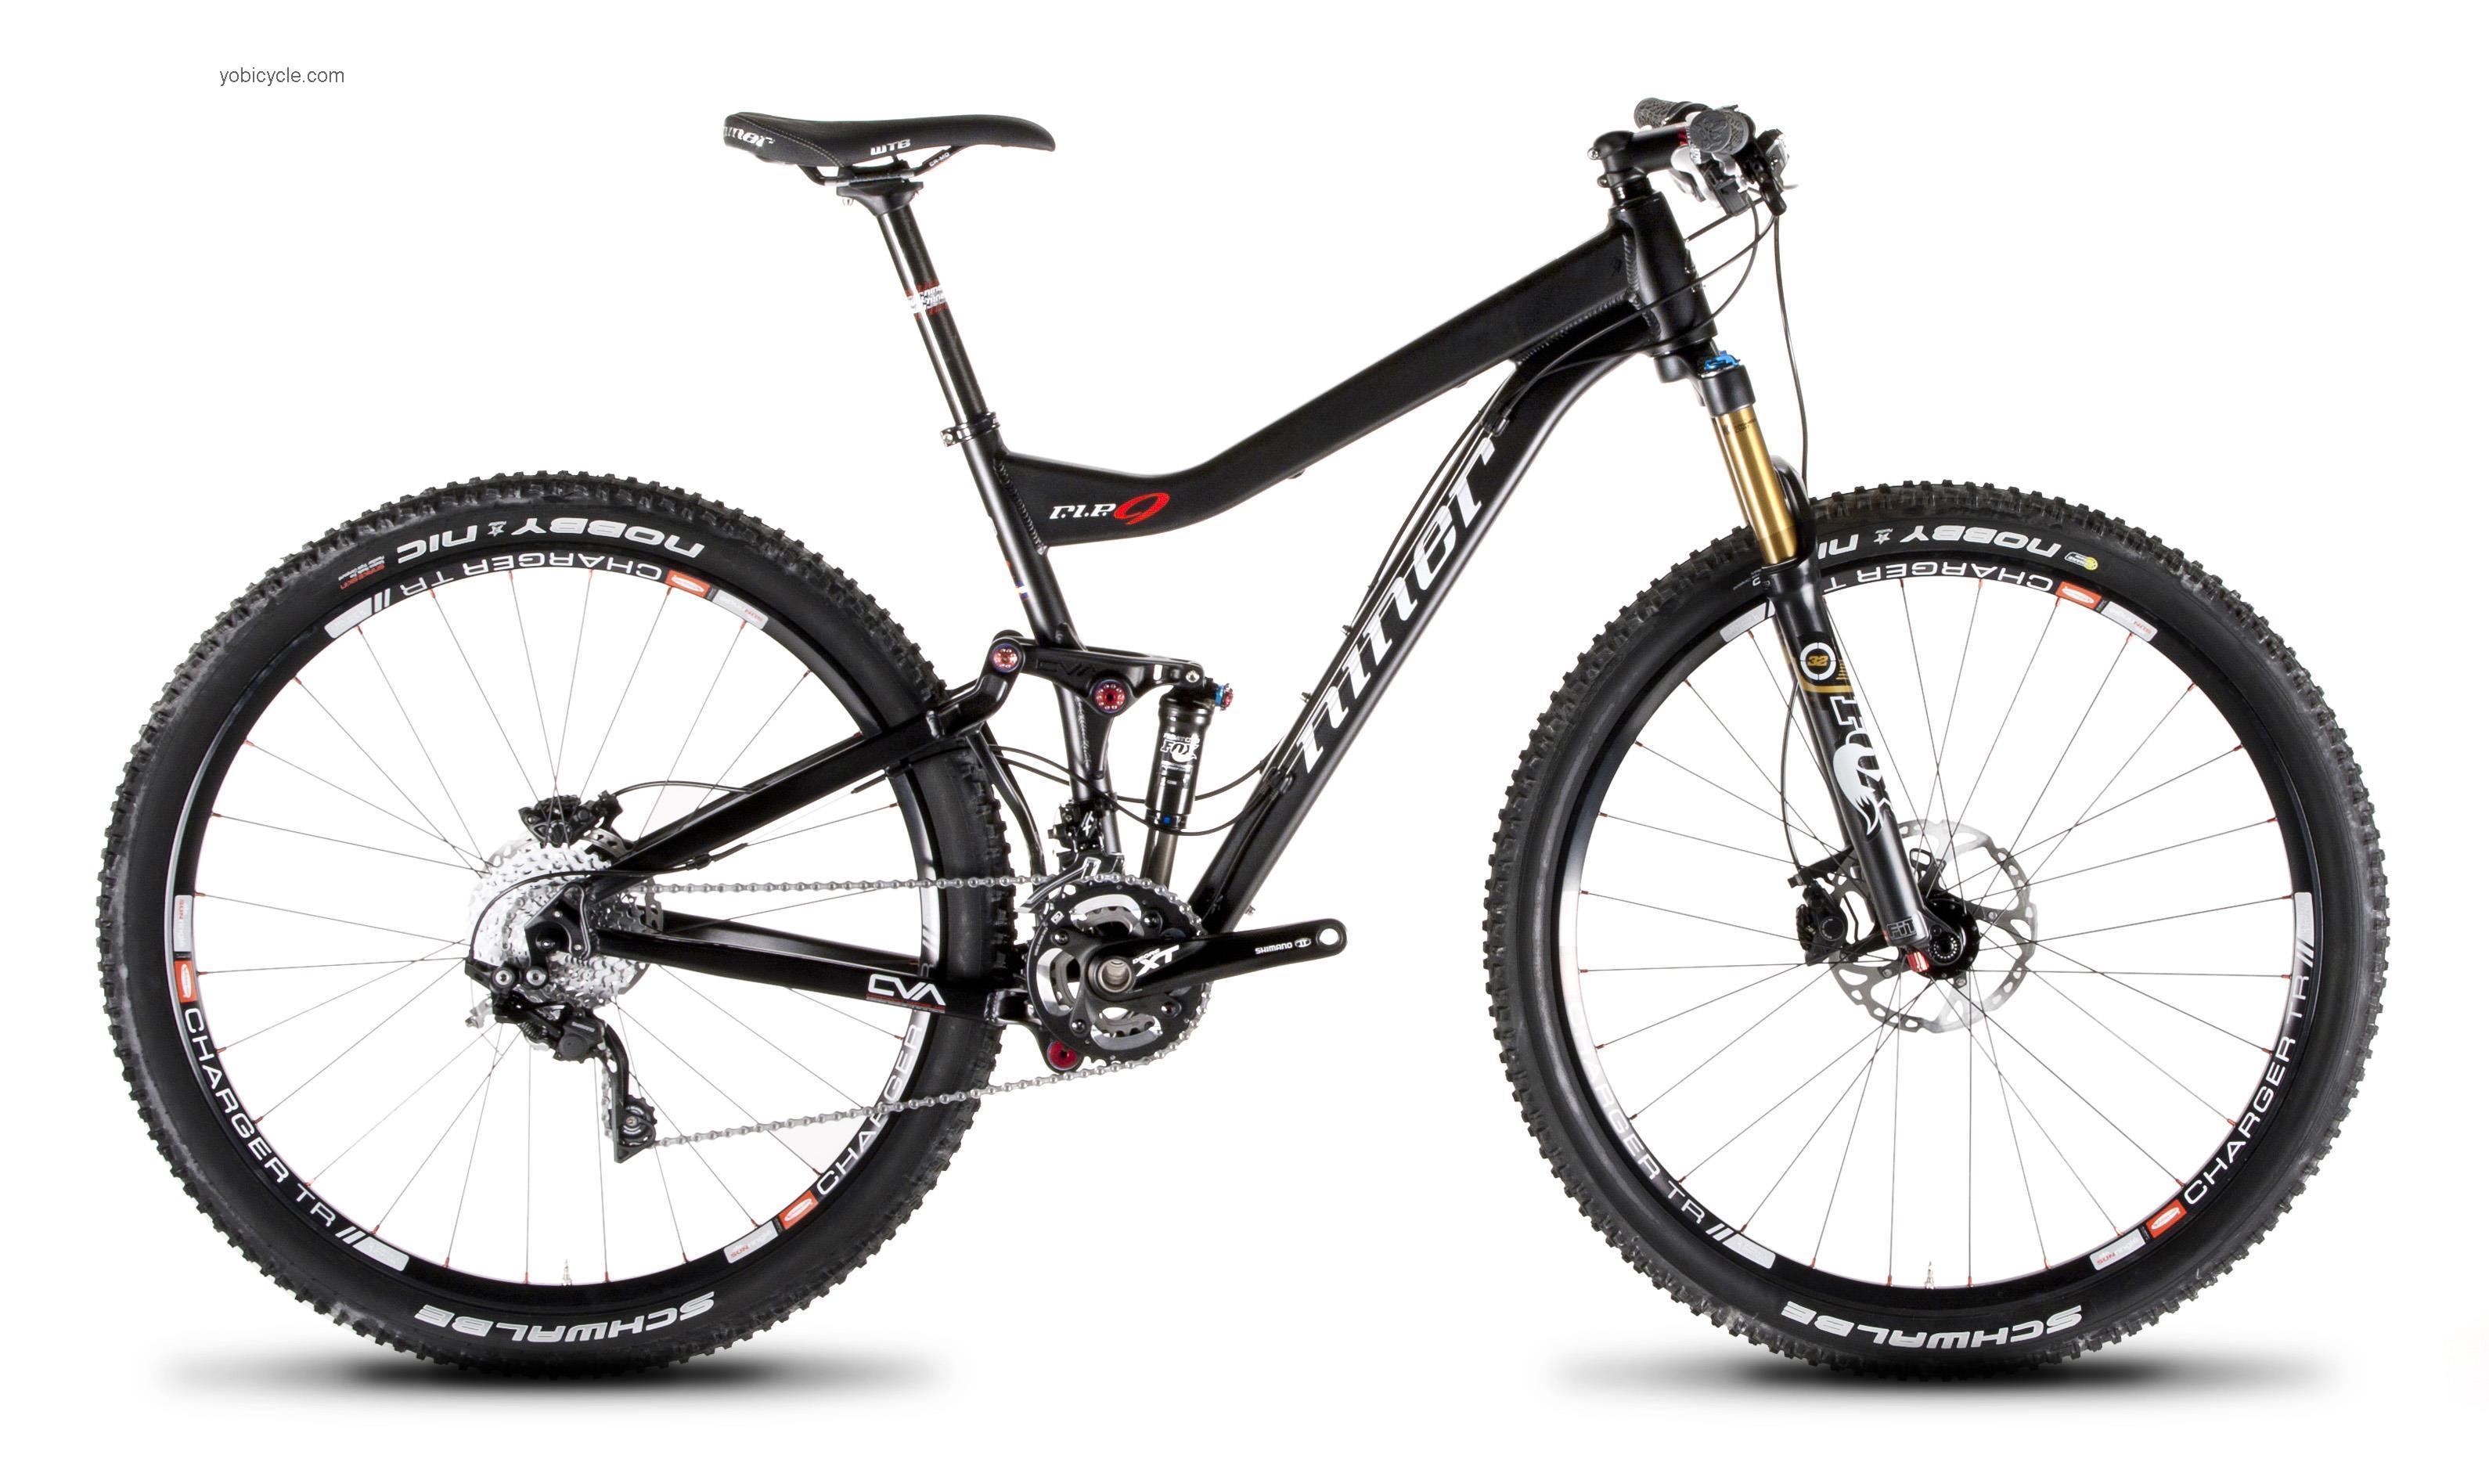 Niner R.I.P 9 XT competitors and comparison tool online specs and performance